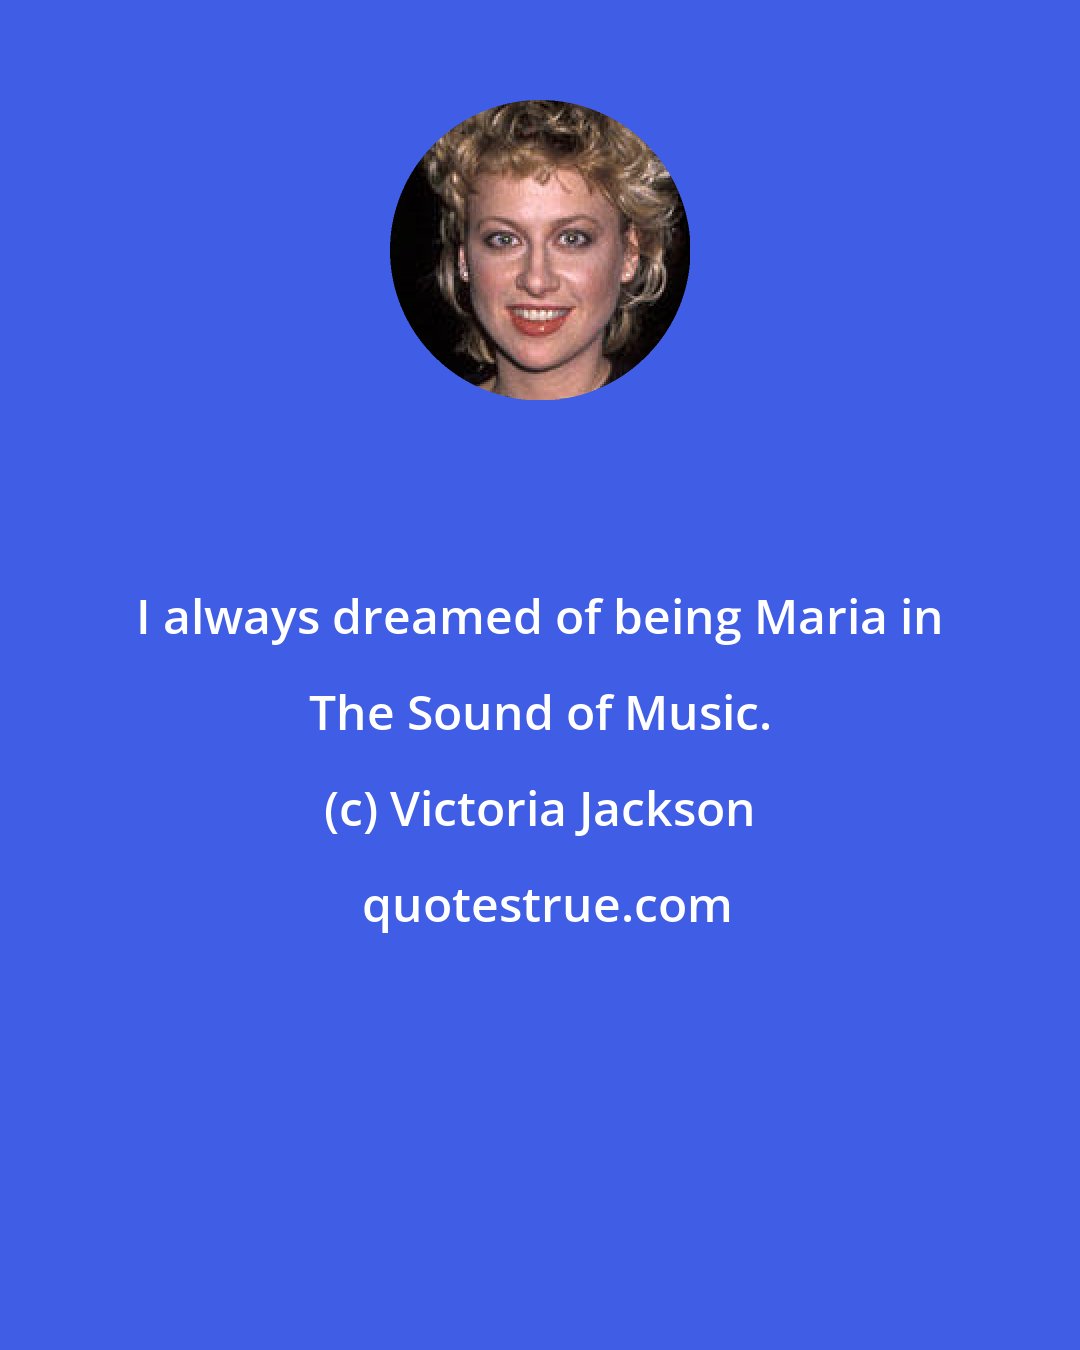 Victoria Jackson: I always dreamed of being Maria in The Sound of Music.